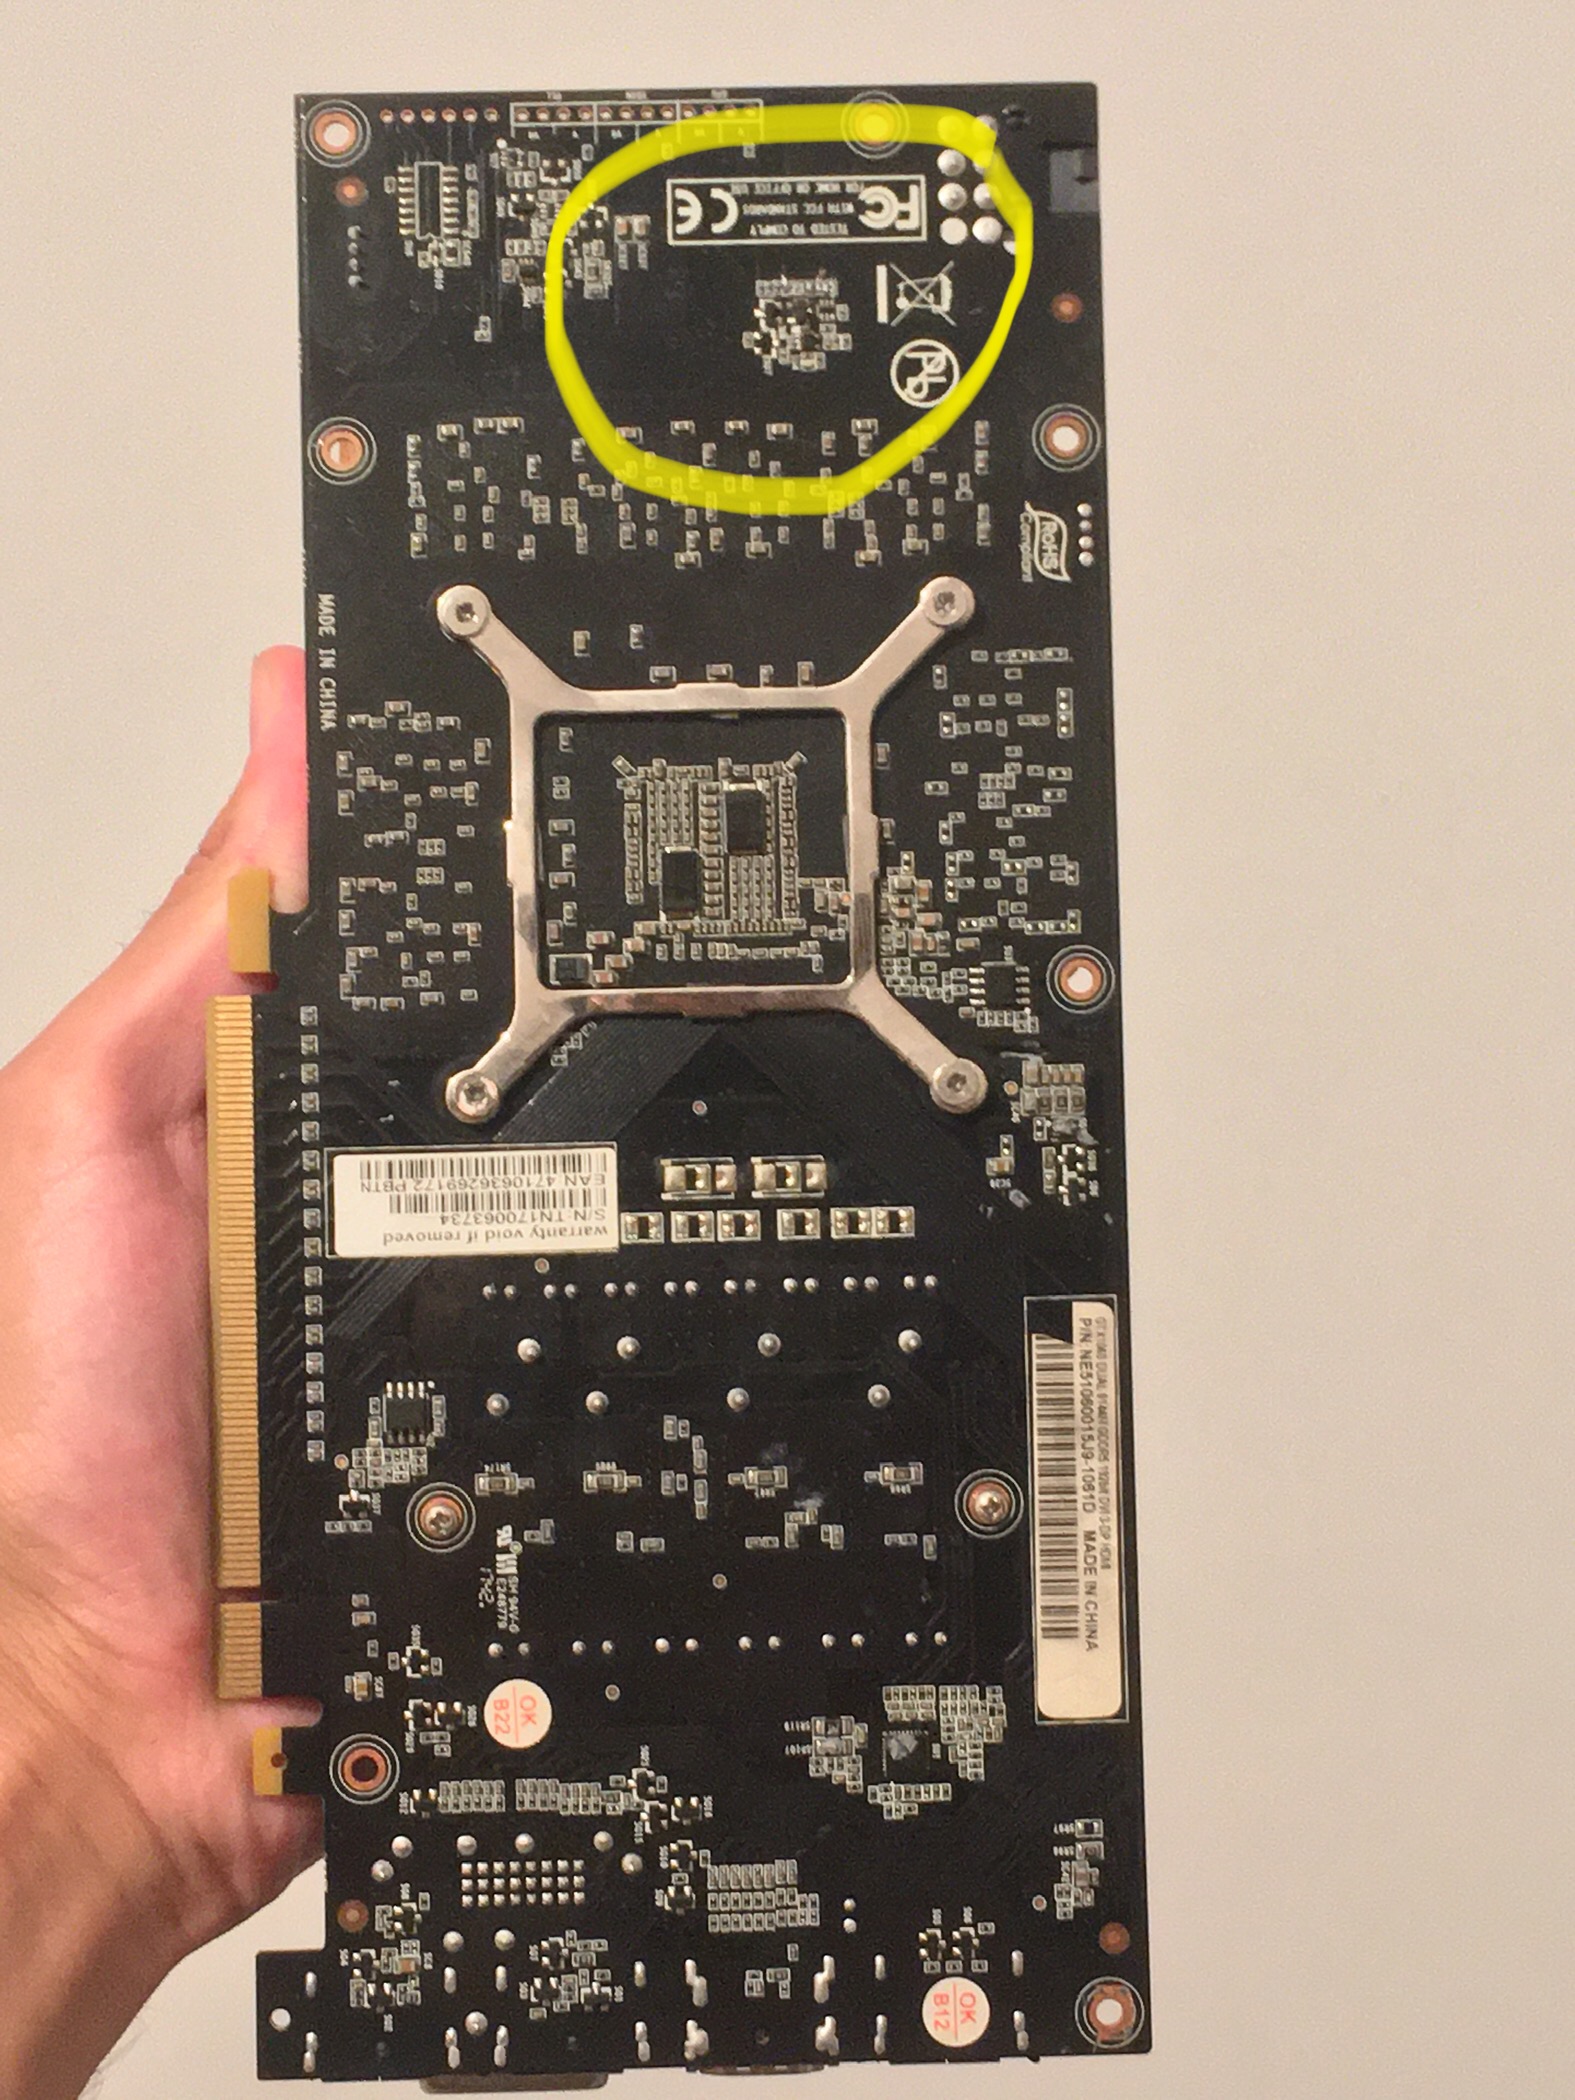 1060 6gb Pcb pictures or schematics TechPowerUp Forums